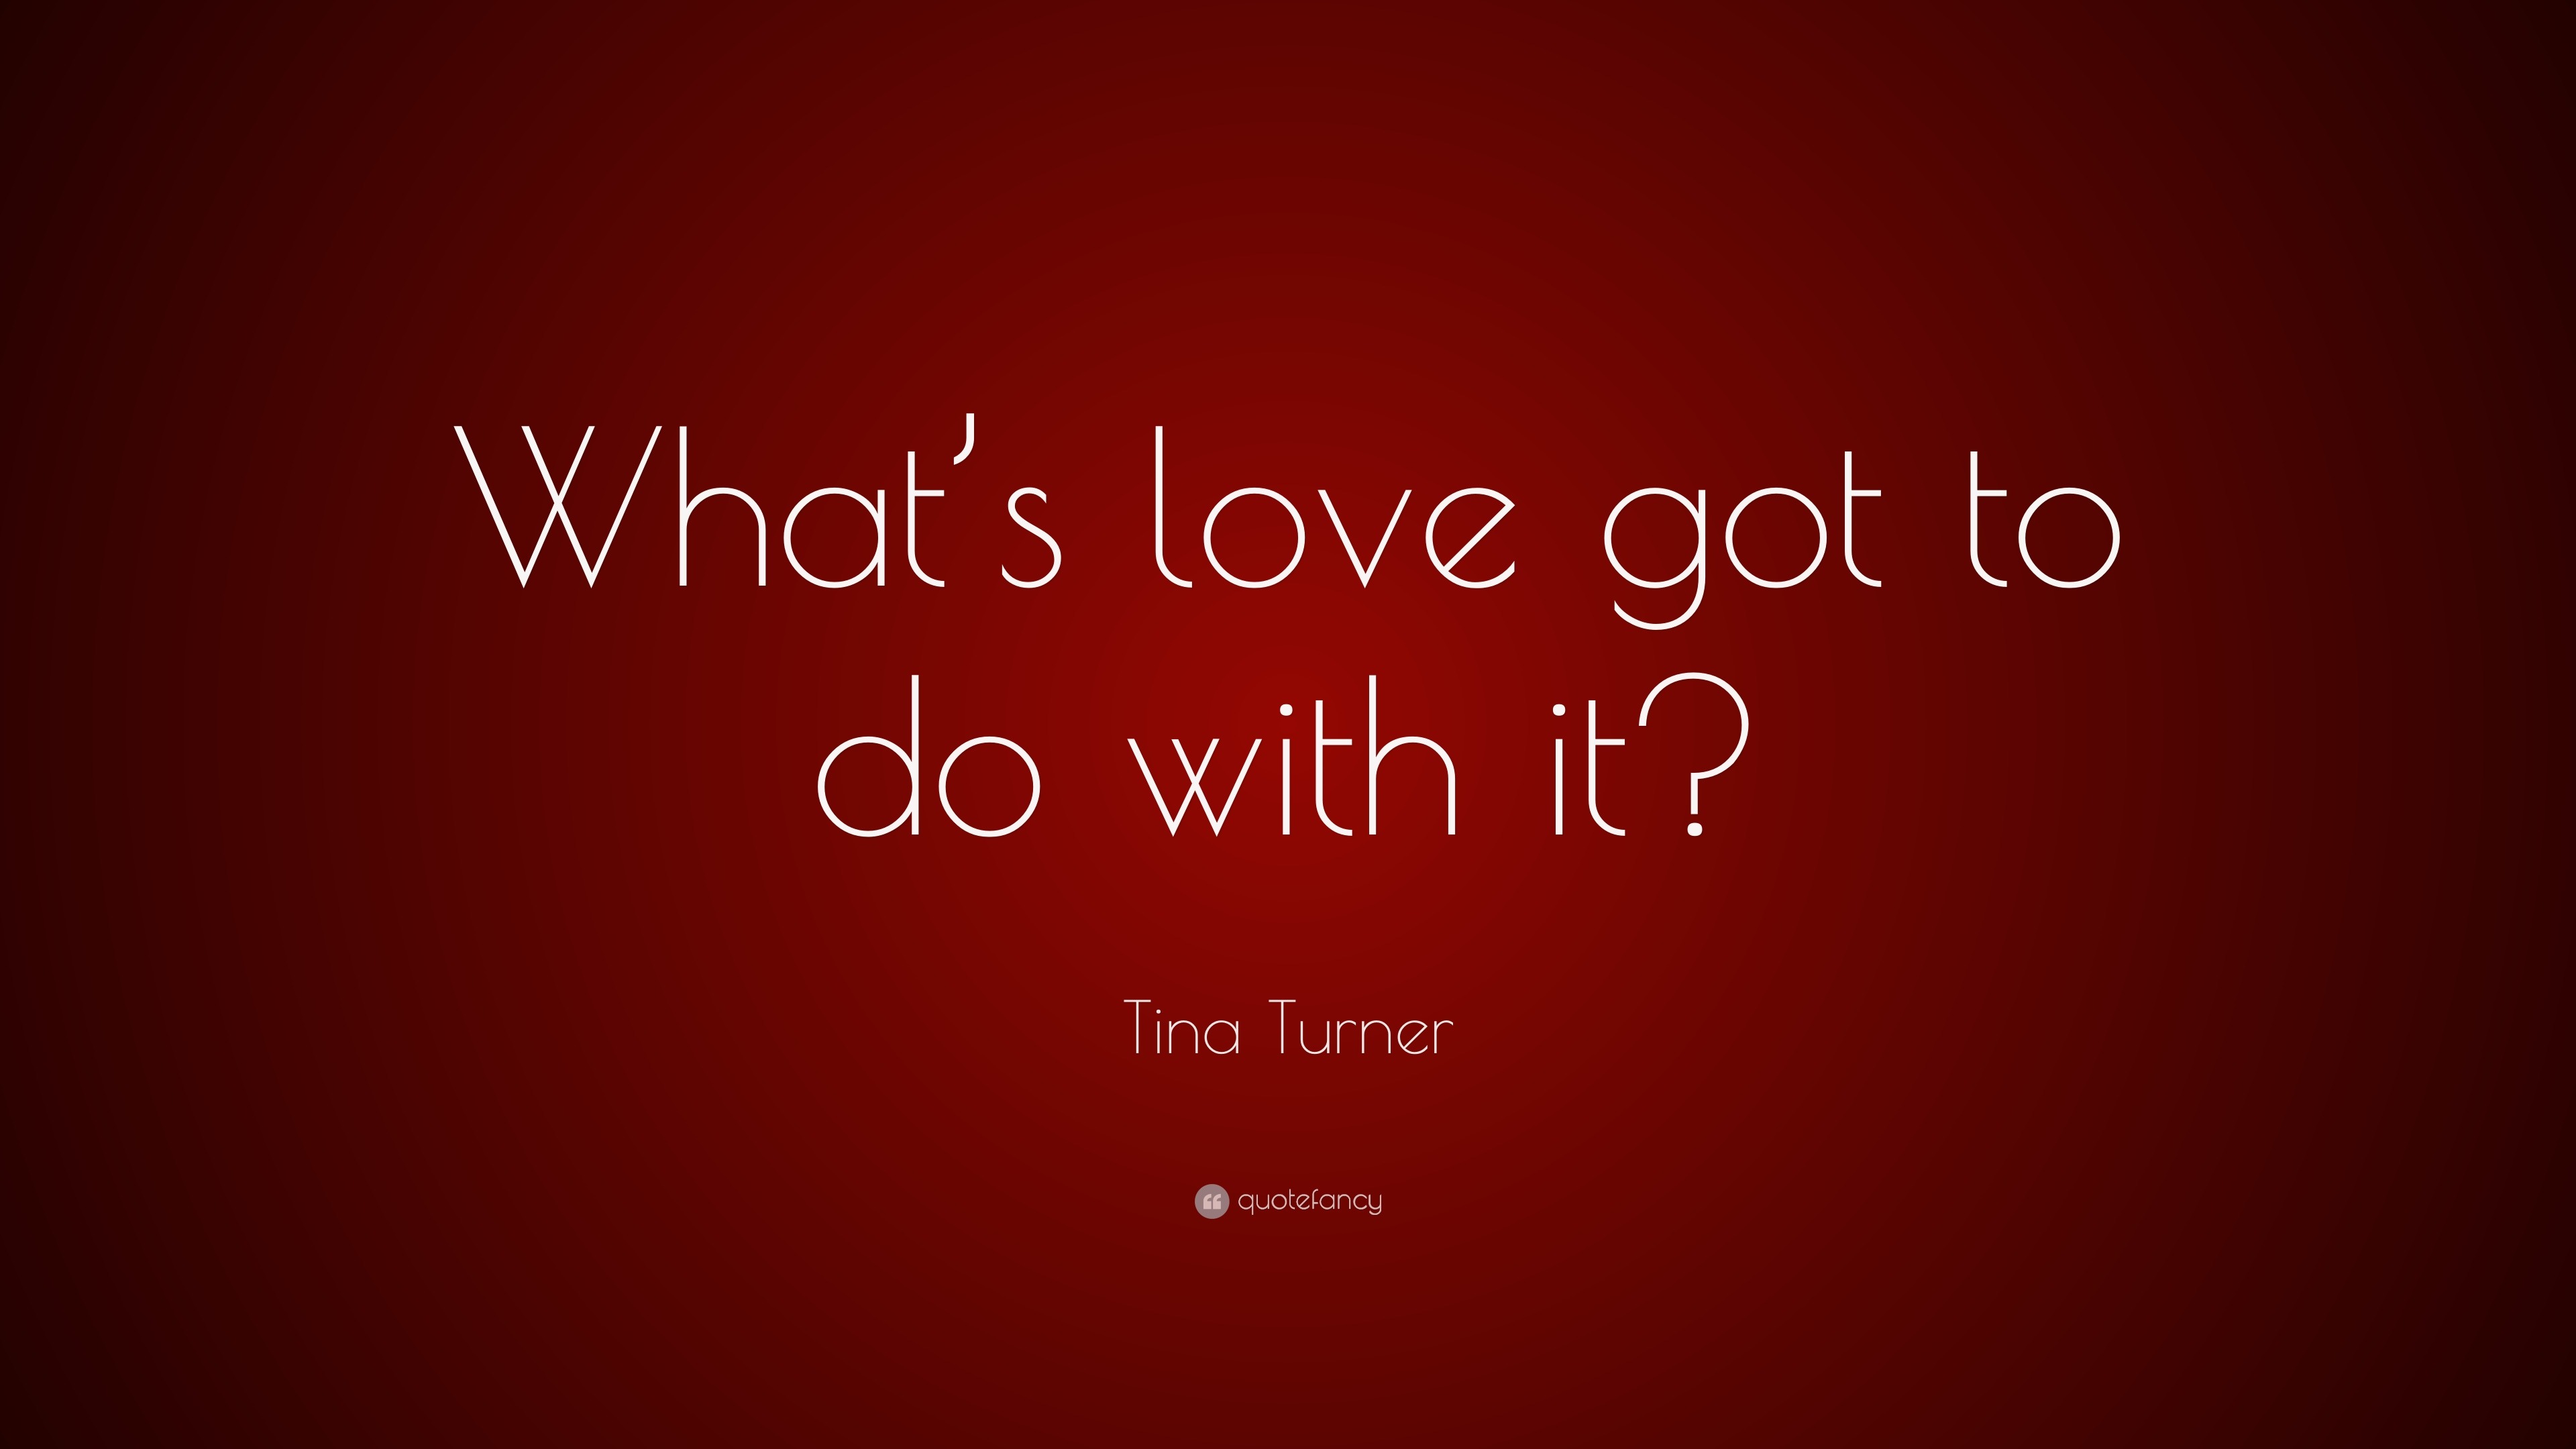 whats love got to do with it quotes